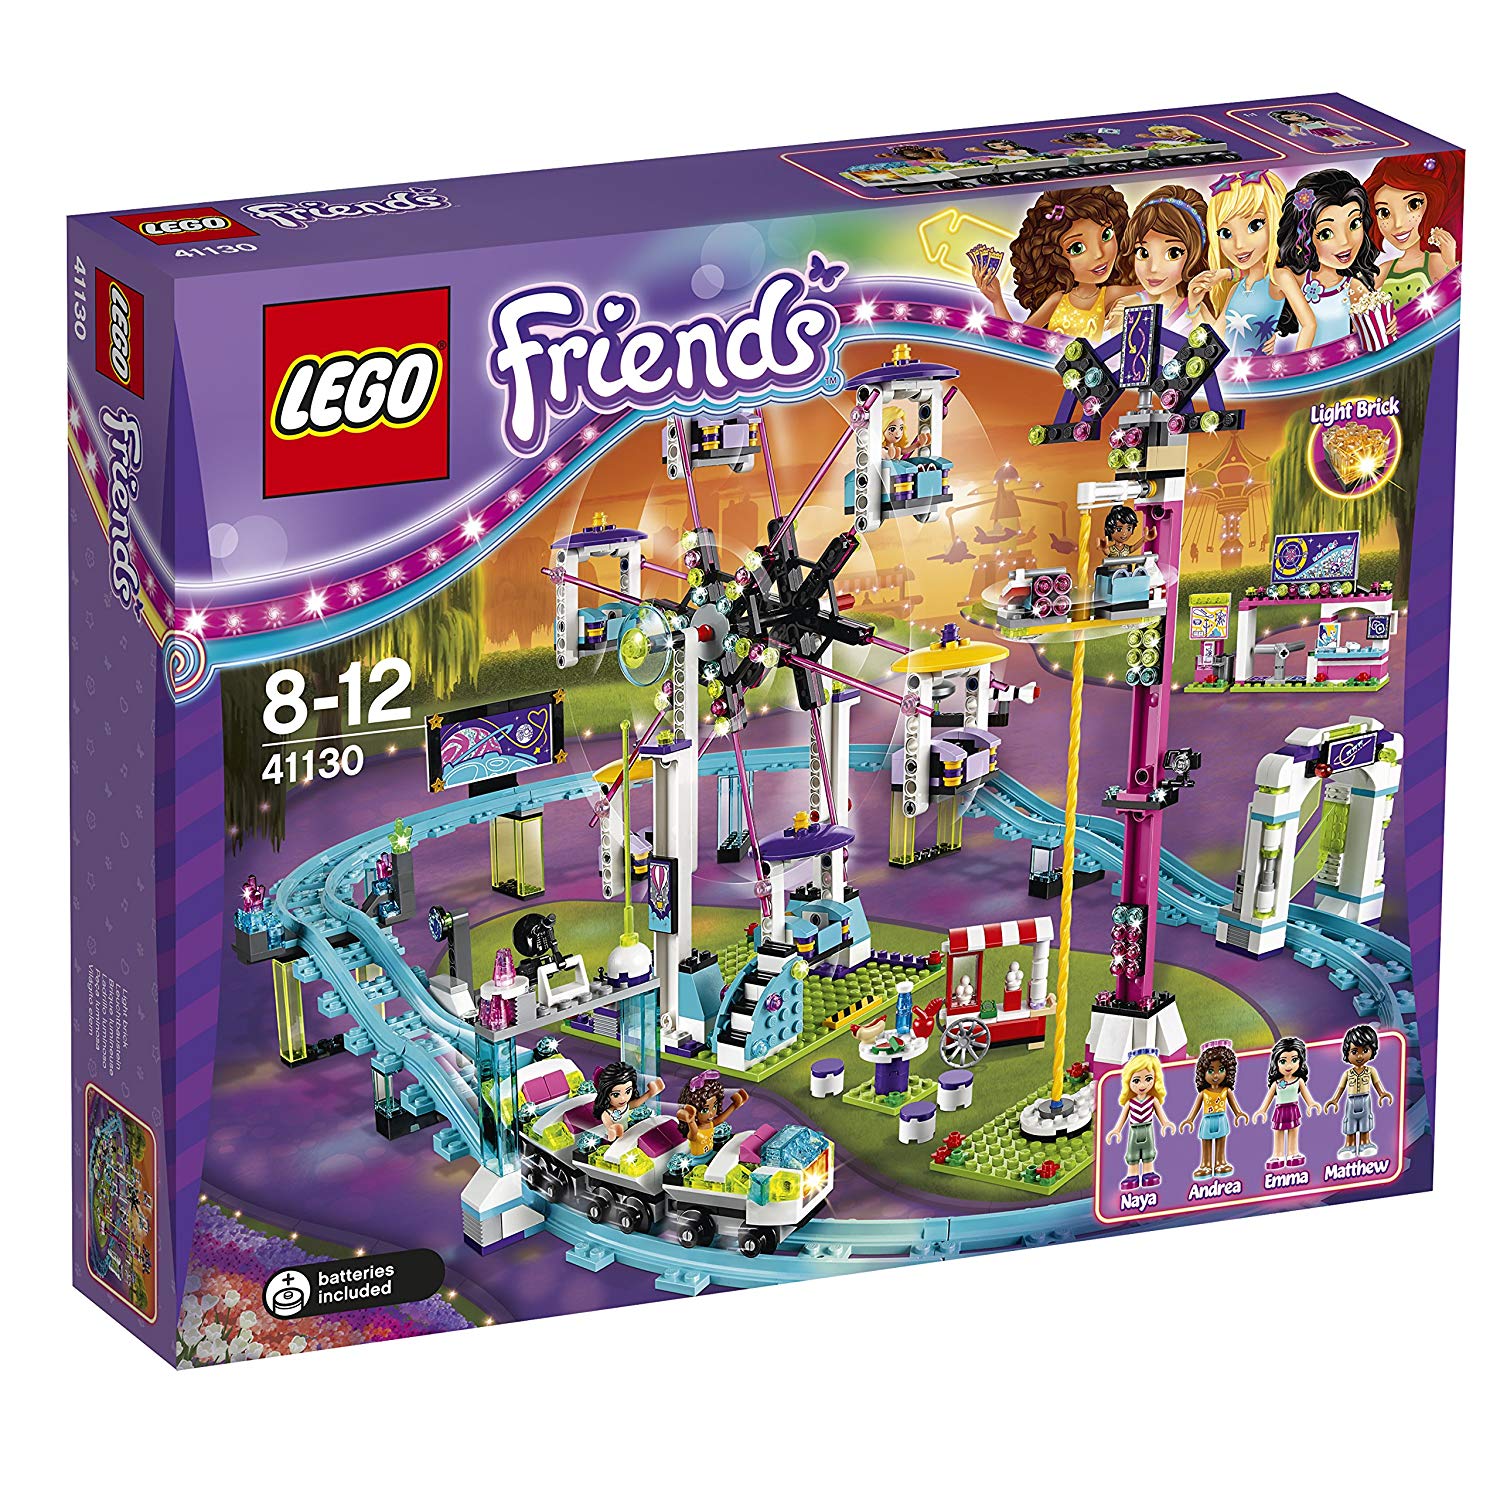 Lego Friends Large Amusement Park Toy For Boys And Girls